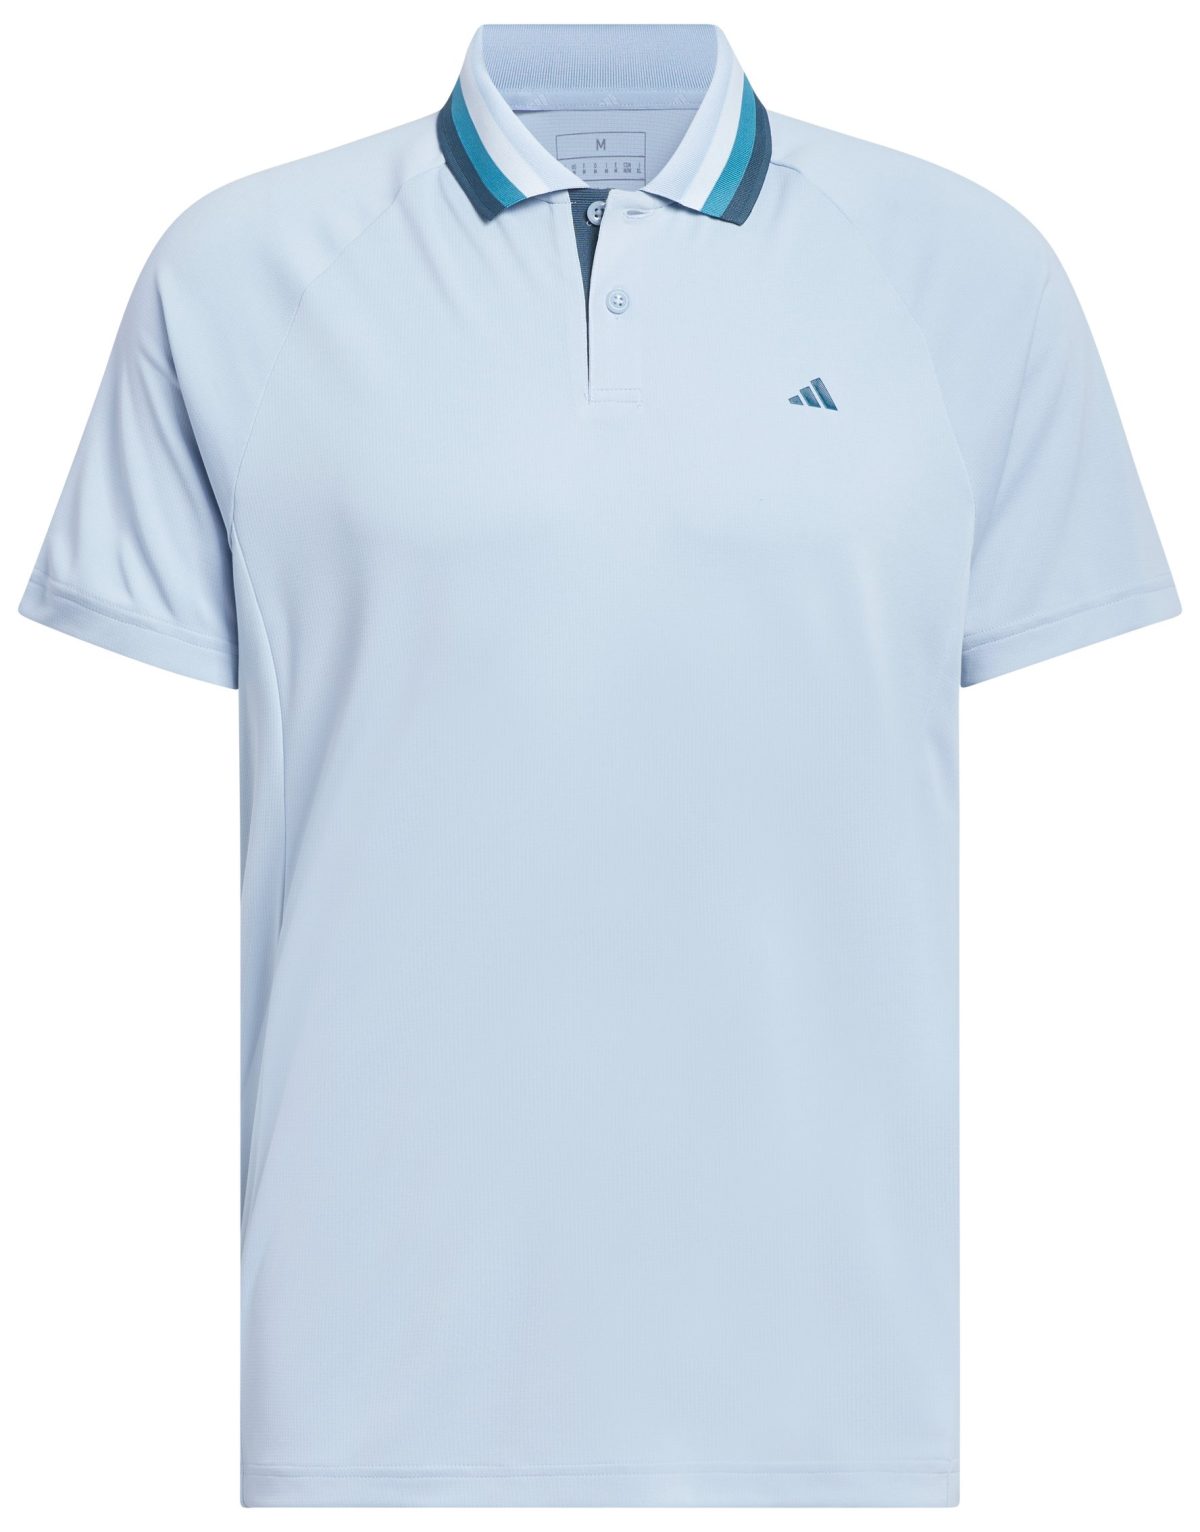 adidas Men's Ultimate365 Tour Heat.rdy Golf Polo Shirt, Polyester/Rayon in Wonder Blue, Size S